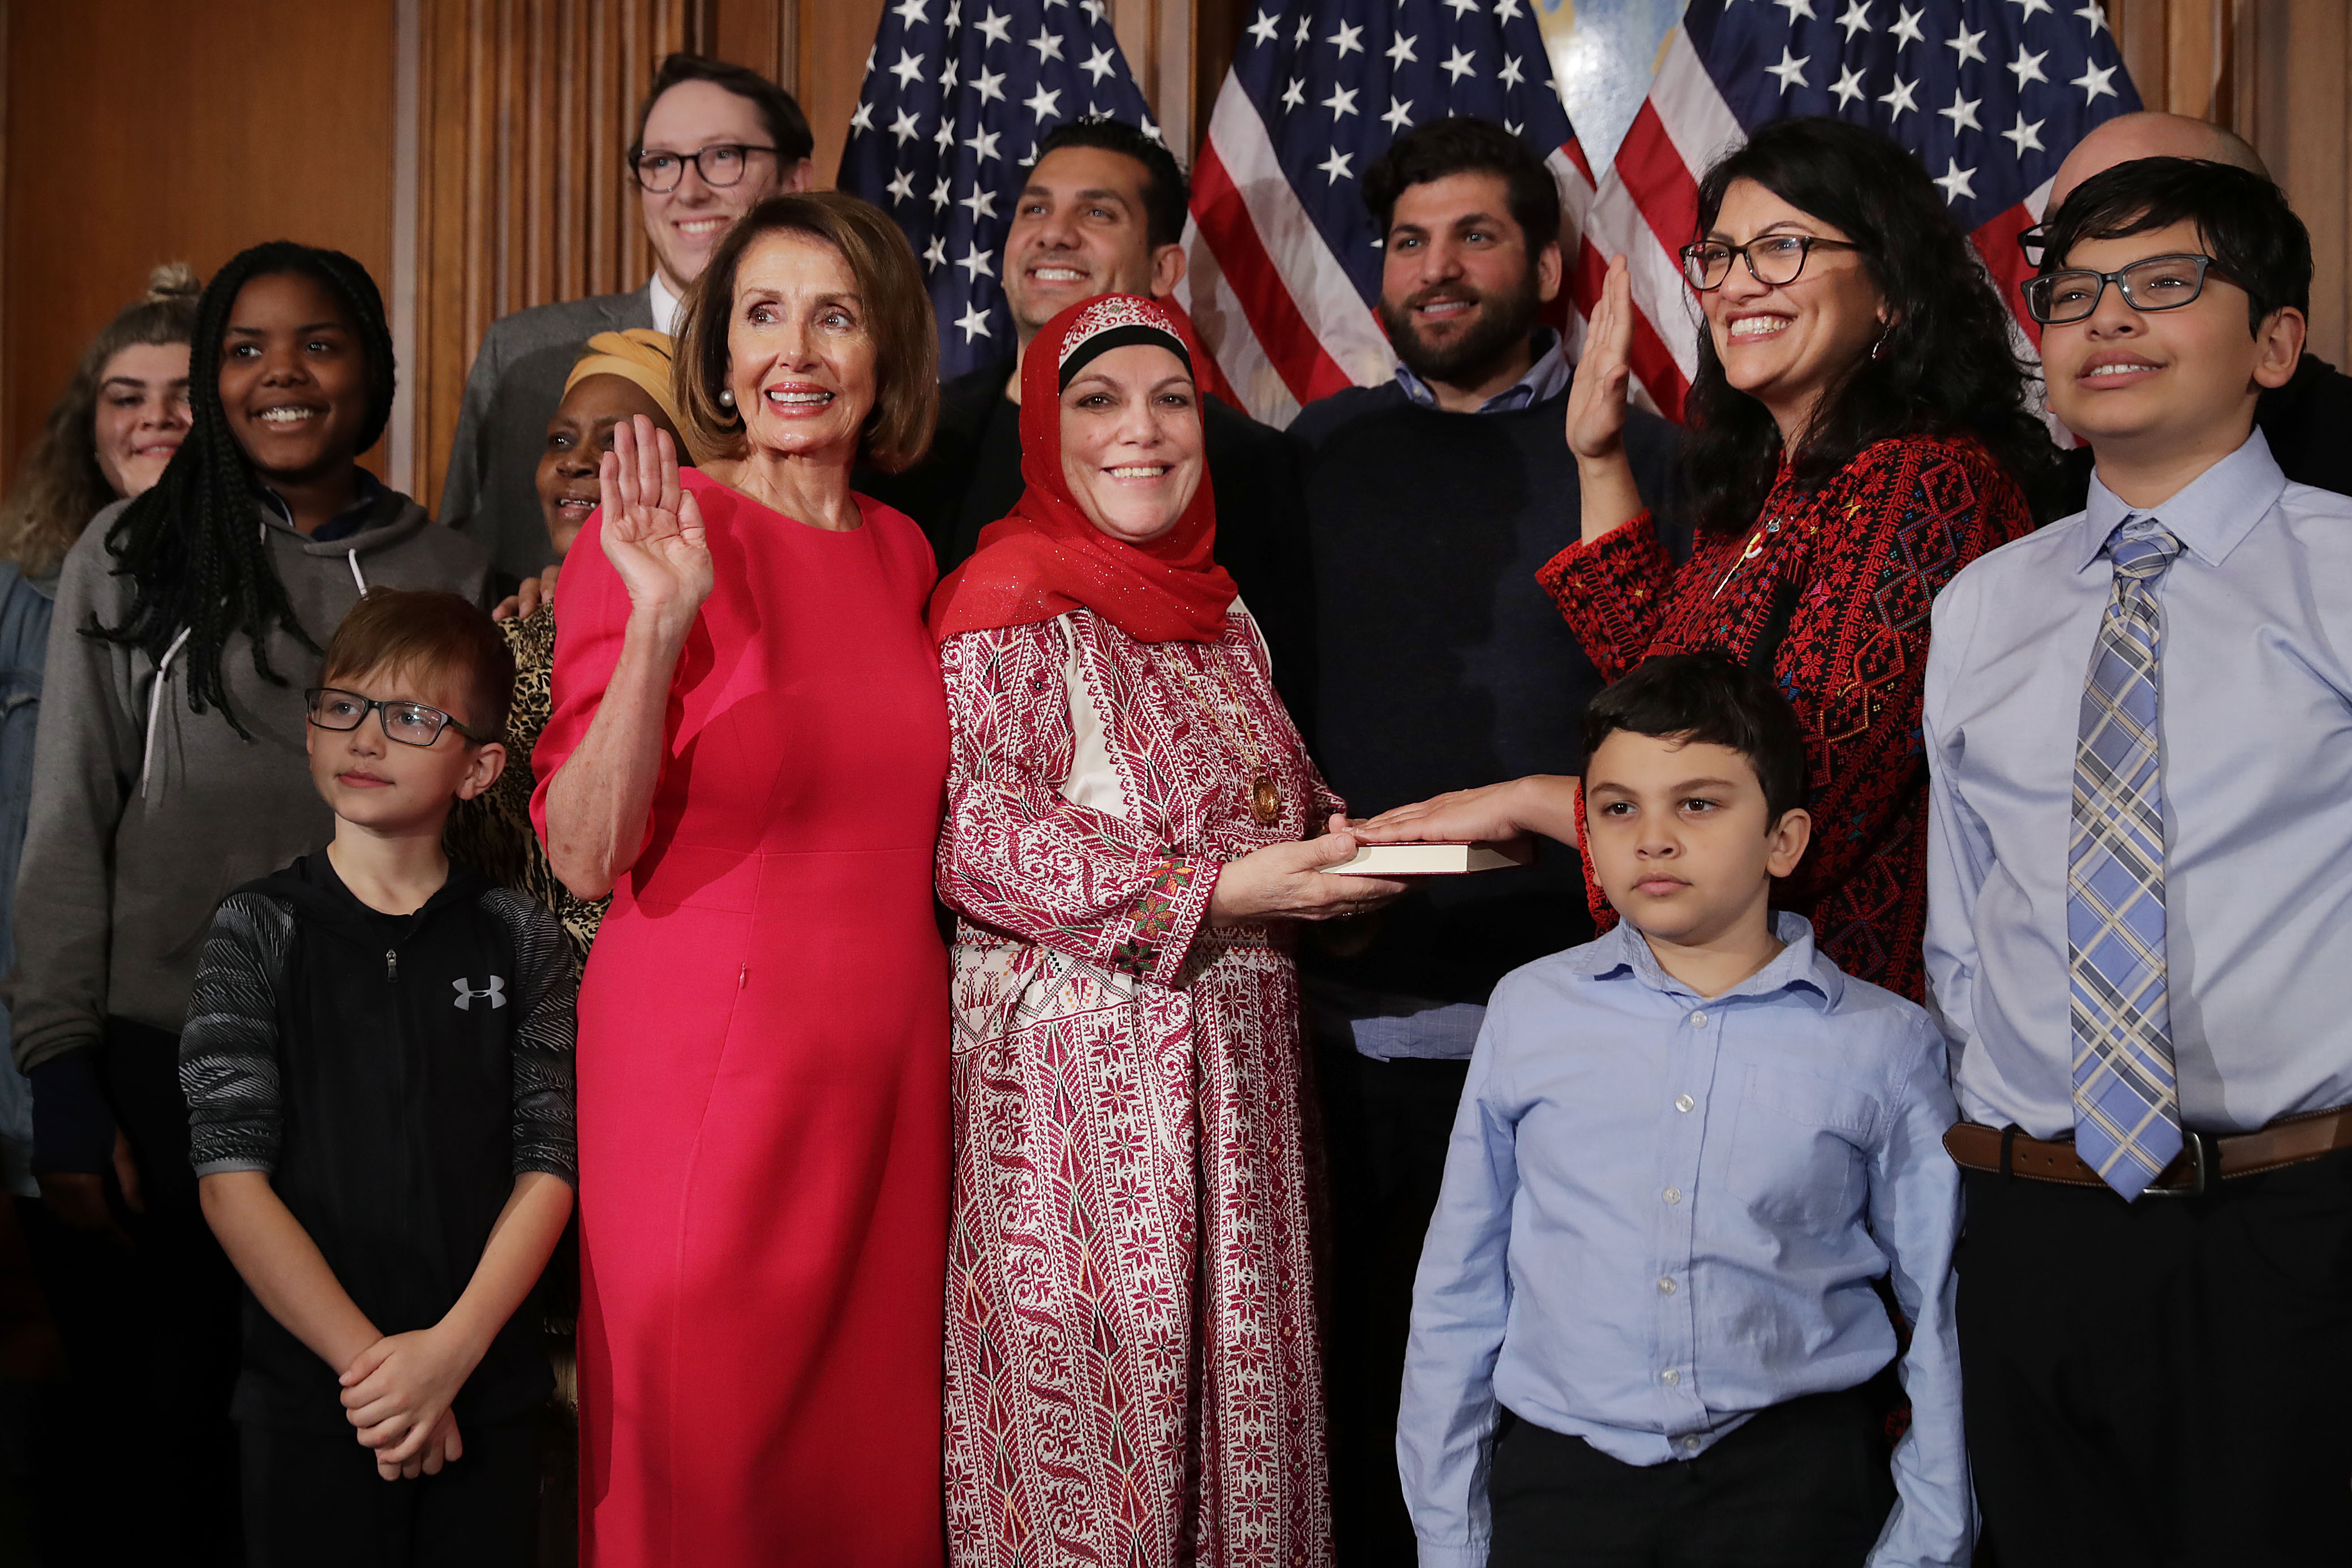 Speaker of the House Nancy Pelosi poses for photographs with Rep. Rashida Tlaib and her family in the Rayburn Room at the U.S. Capitol January 03, 2019 in Washington, DC. (Photo by Chip Somodevilla/Getty Images)